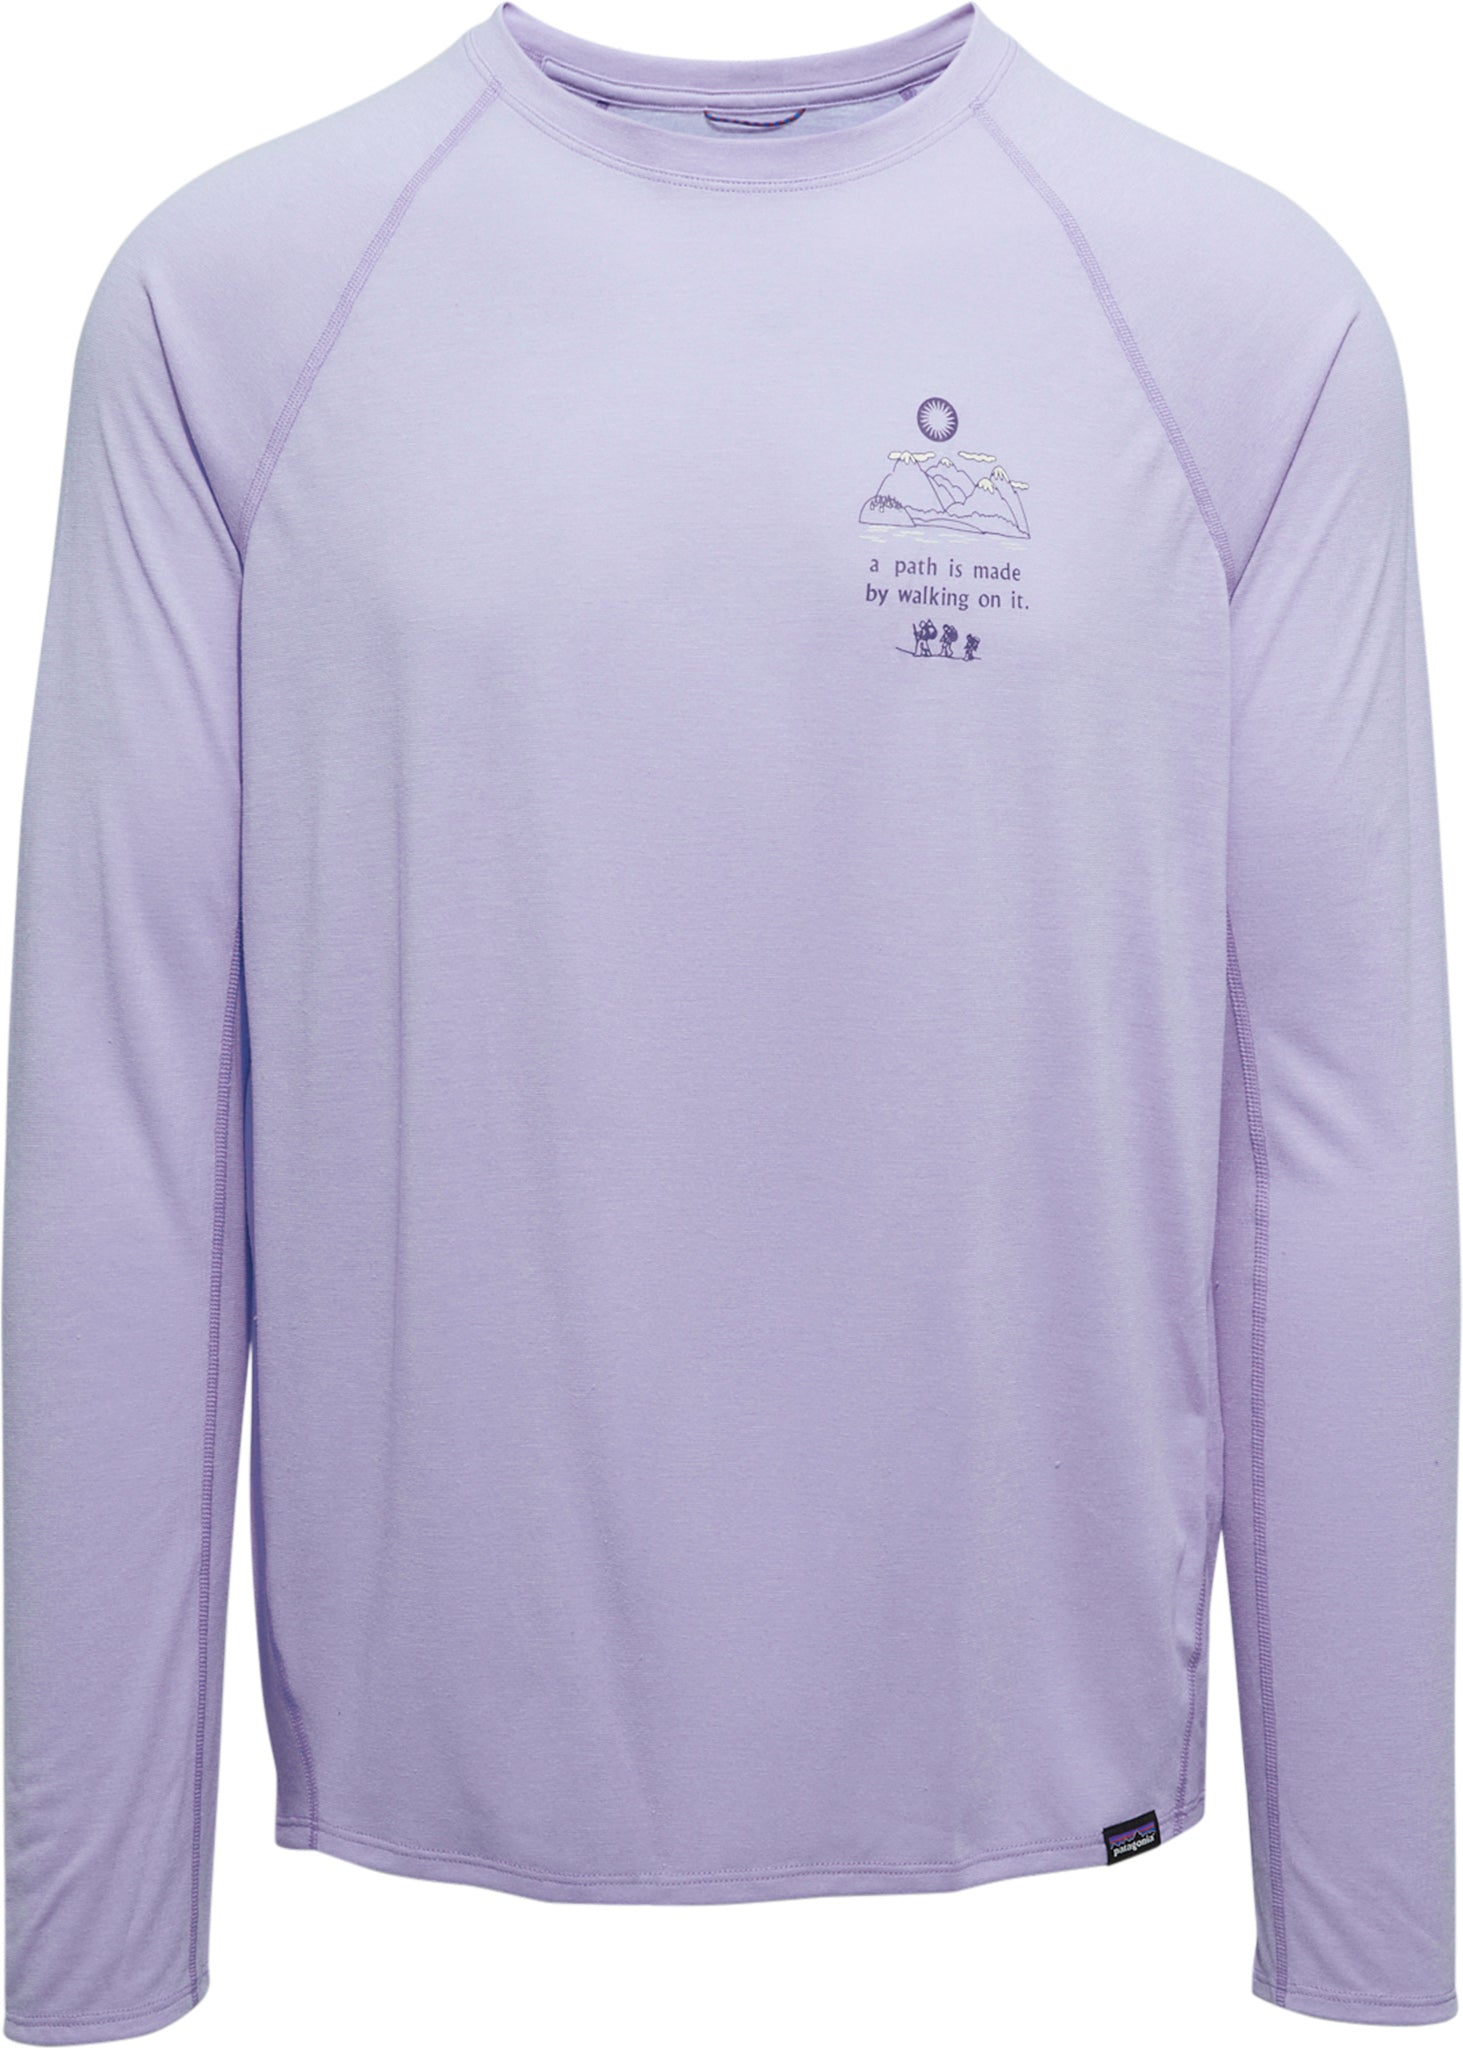 T-Shirt Running Homme CRAFT PRO TRAIL Violet PE 2023